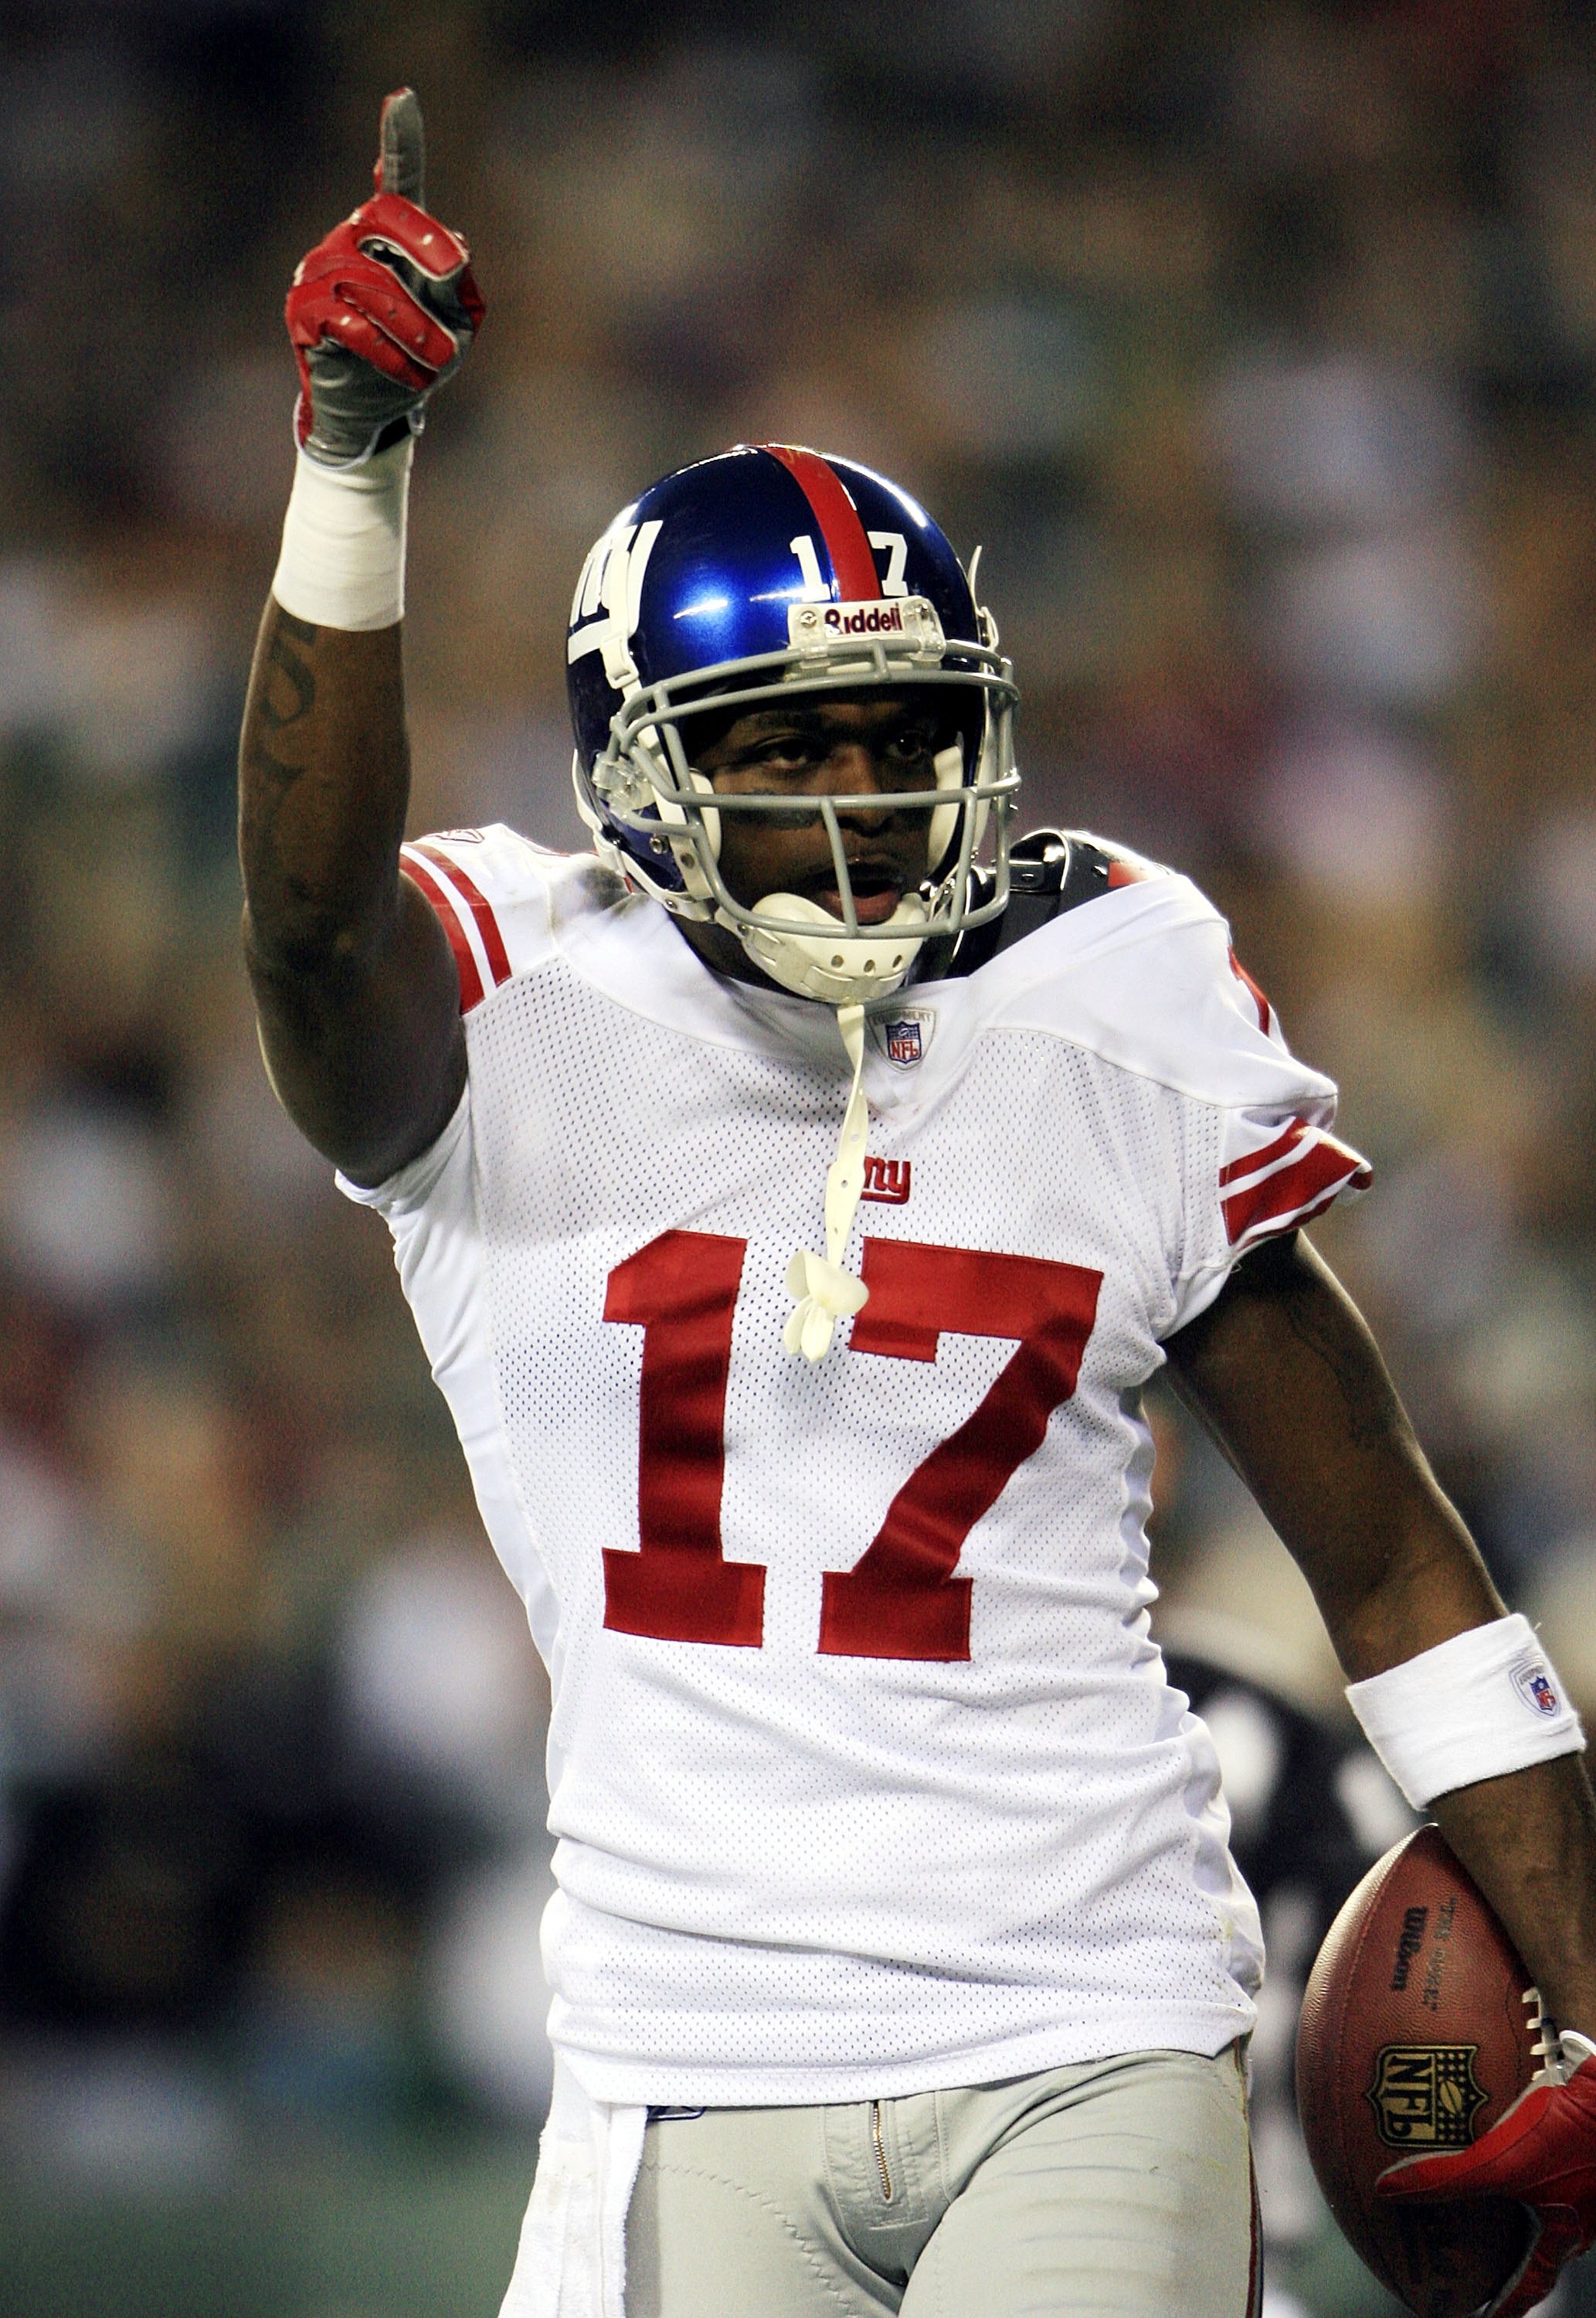 PHILADELPHIA - JANUARY 07:  Plaxico Burress #17 of the New York Giants celebrates his 17-yard touchdown against the Philadelphia Eagles in the first quarter during their NFC Wildcard Playoff game on January 7, 2007 at Lincoln Financial Field in Philadelph